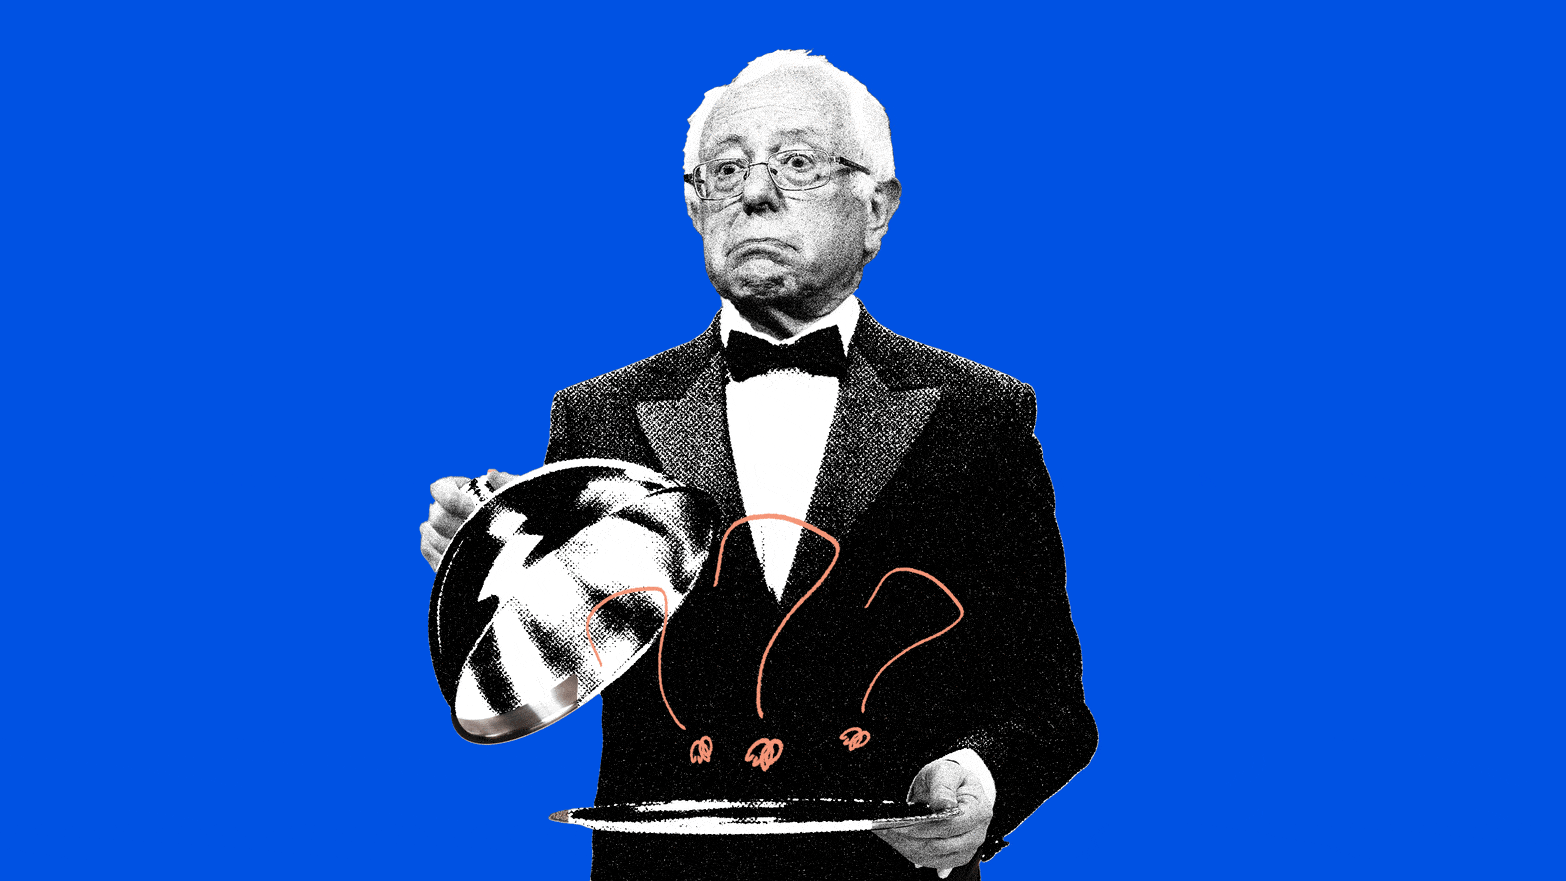 A photo illustration of Bernie Sanders as a waiter revealing a plate of nothing but question marks